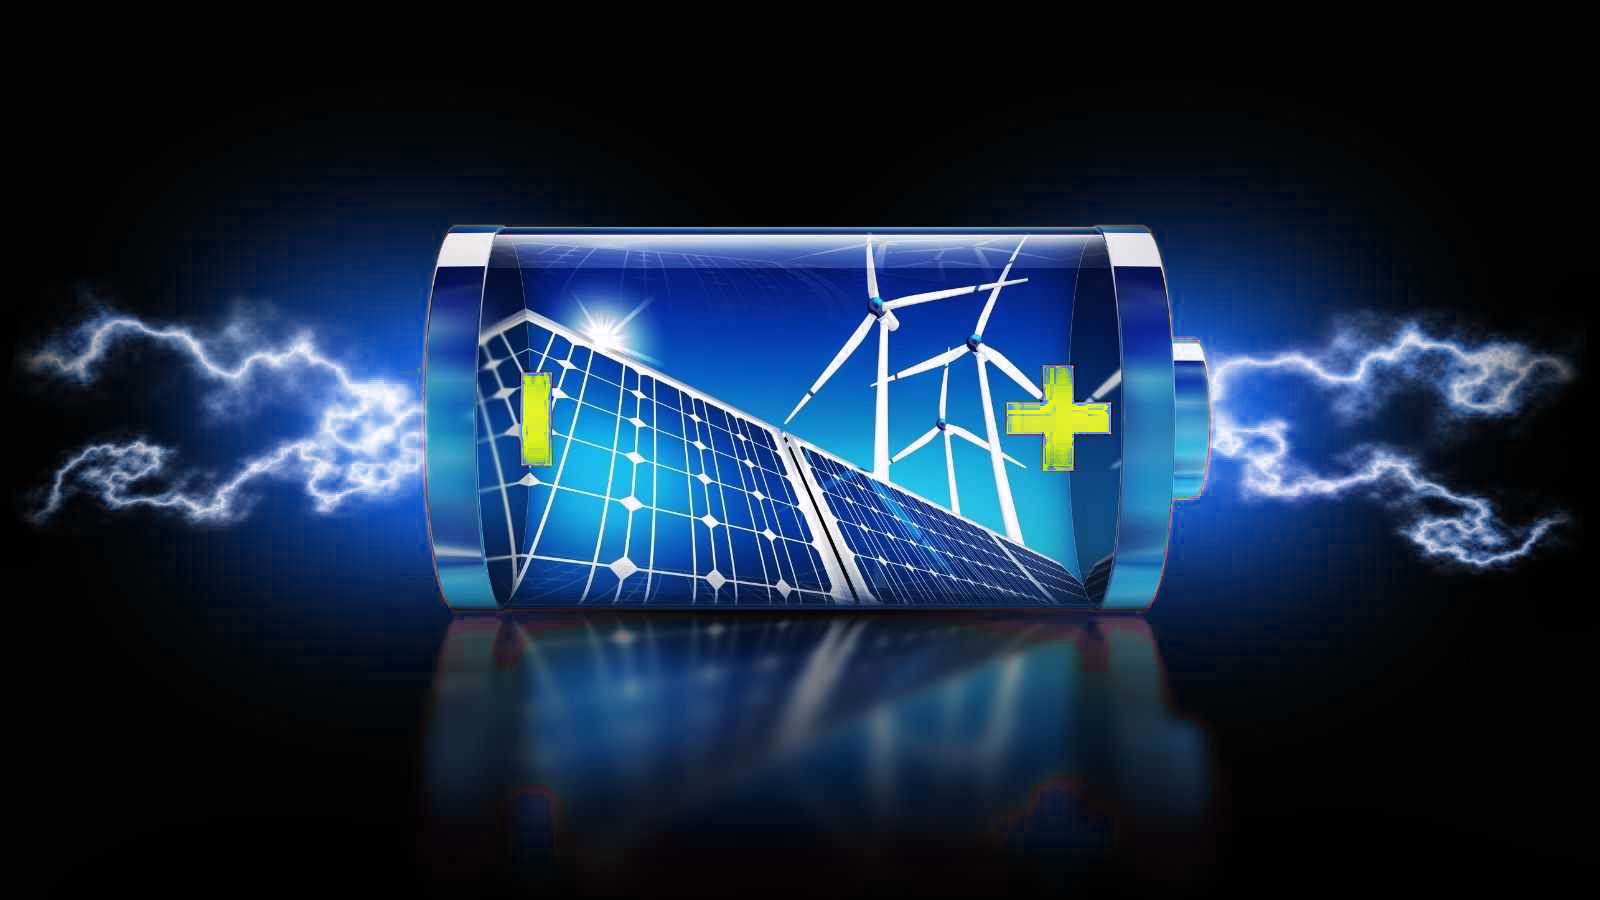 Chemical Short-Range Disorder Promises to Increase Battery Energy Storage - Decreases Charging Time